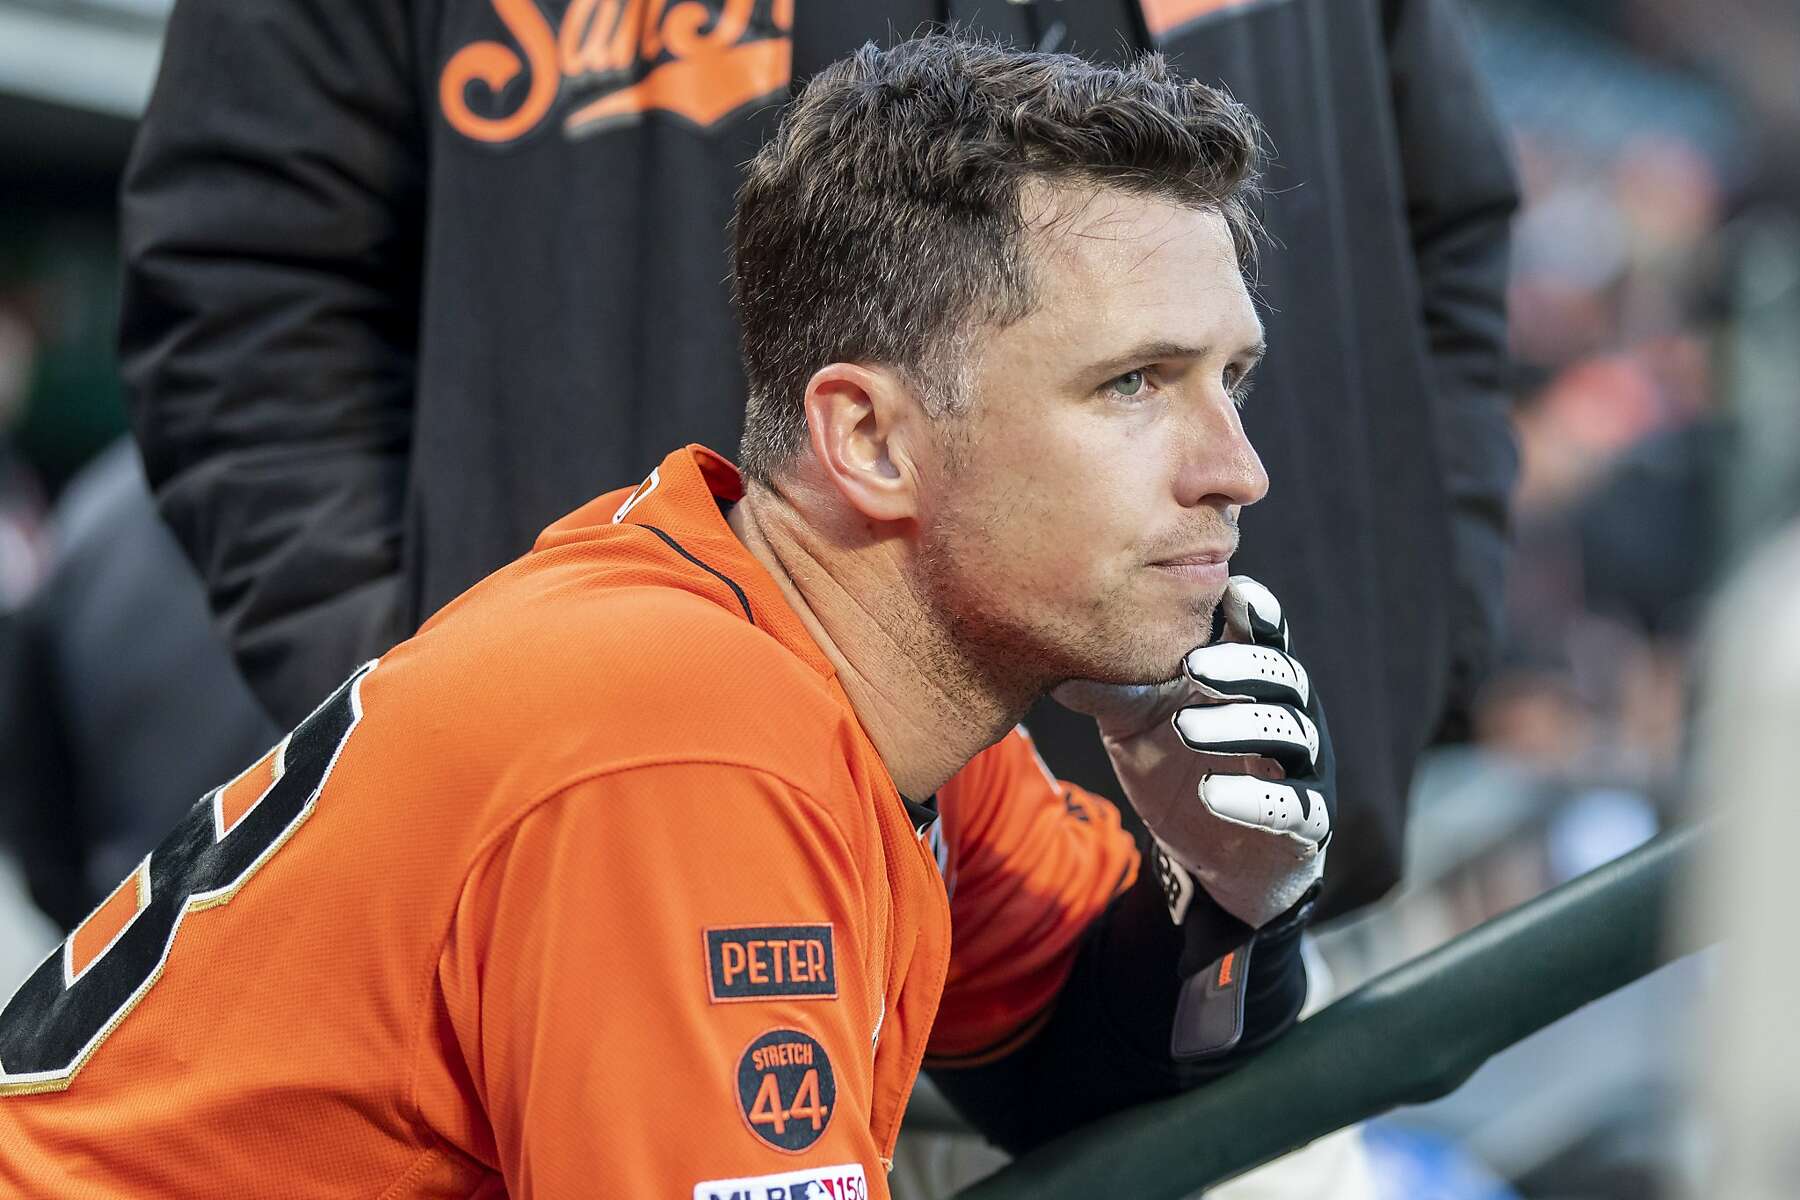 SF Giants' Buster Posey opts out of 2020 season after adopting twins